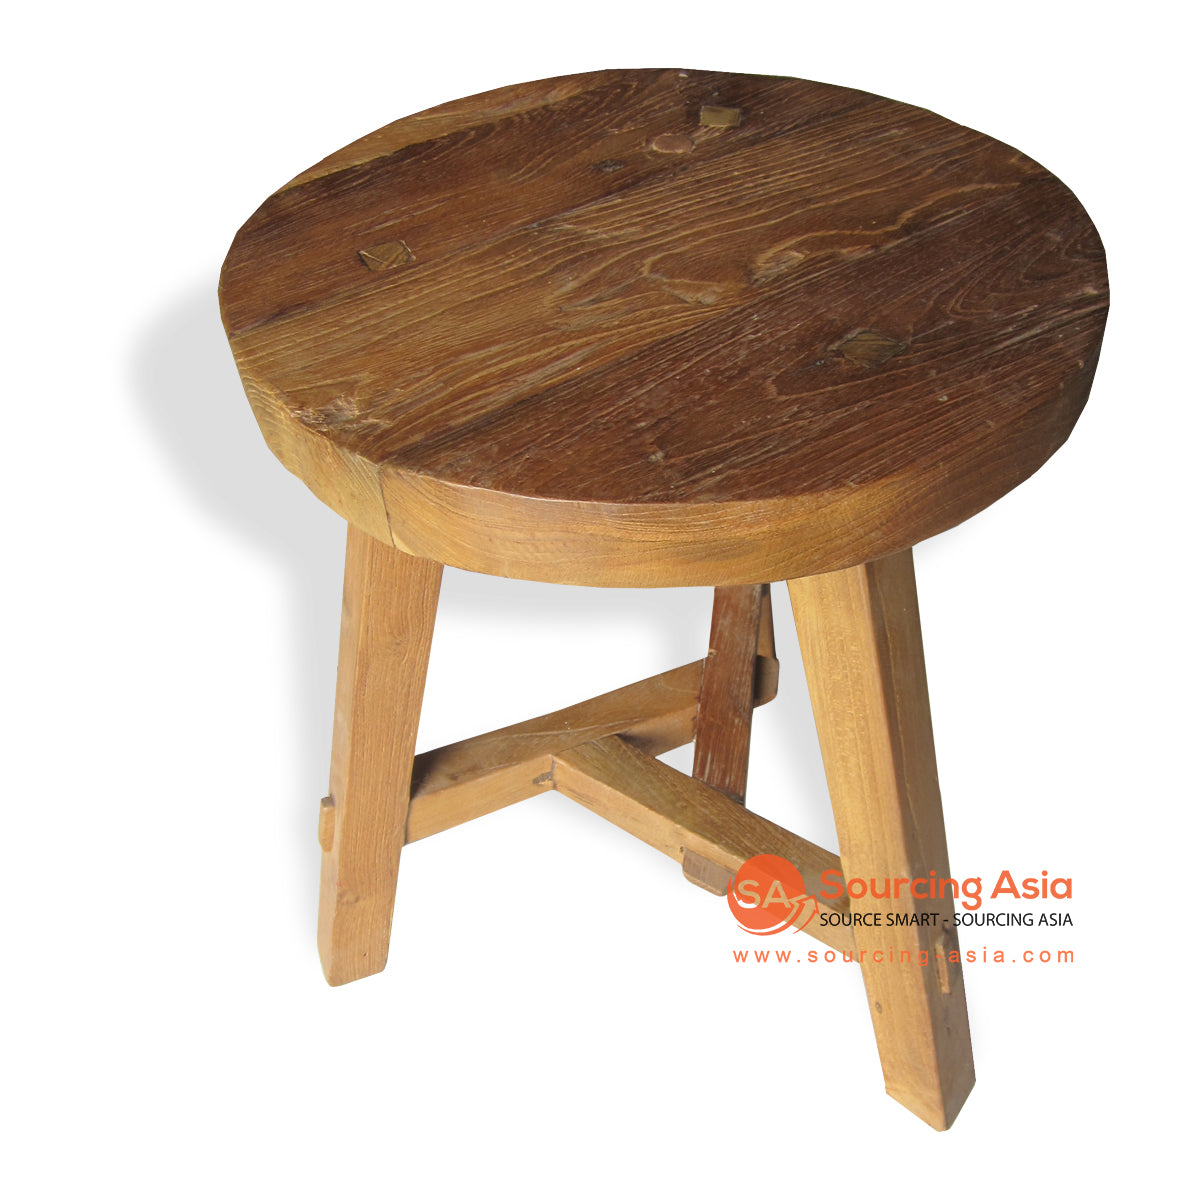 WK225-35 NATURAL RECYCLED BOAT WOOD TRIPOD STOOL